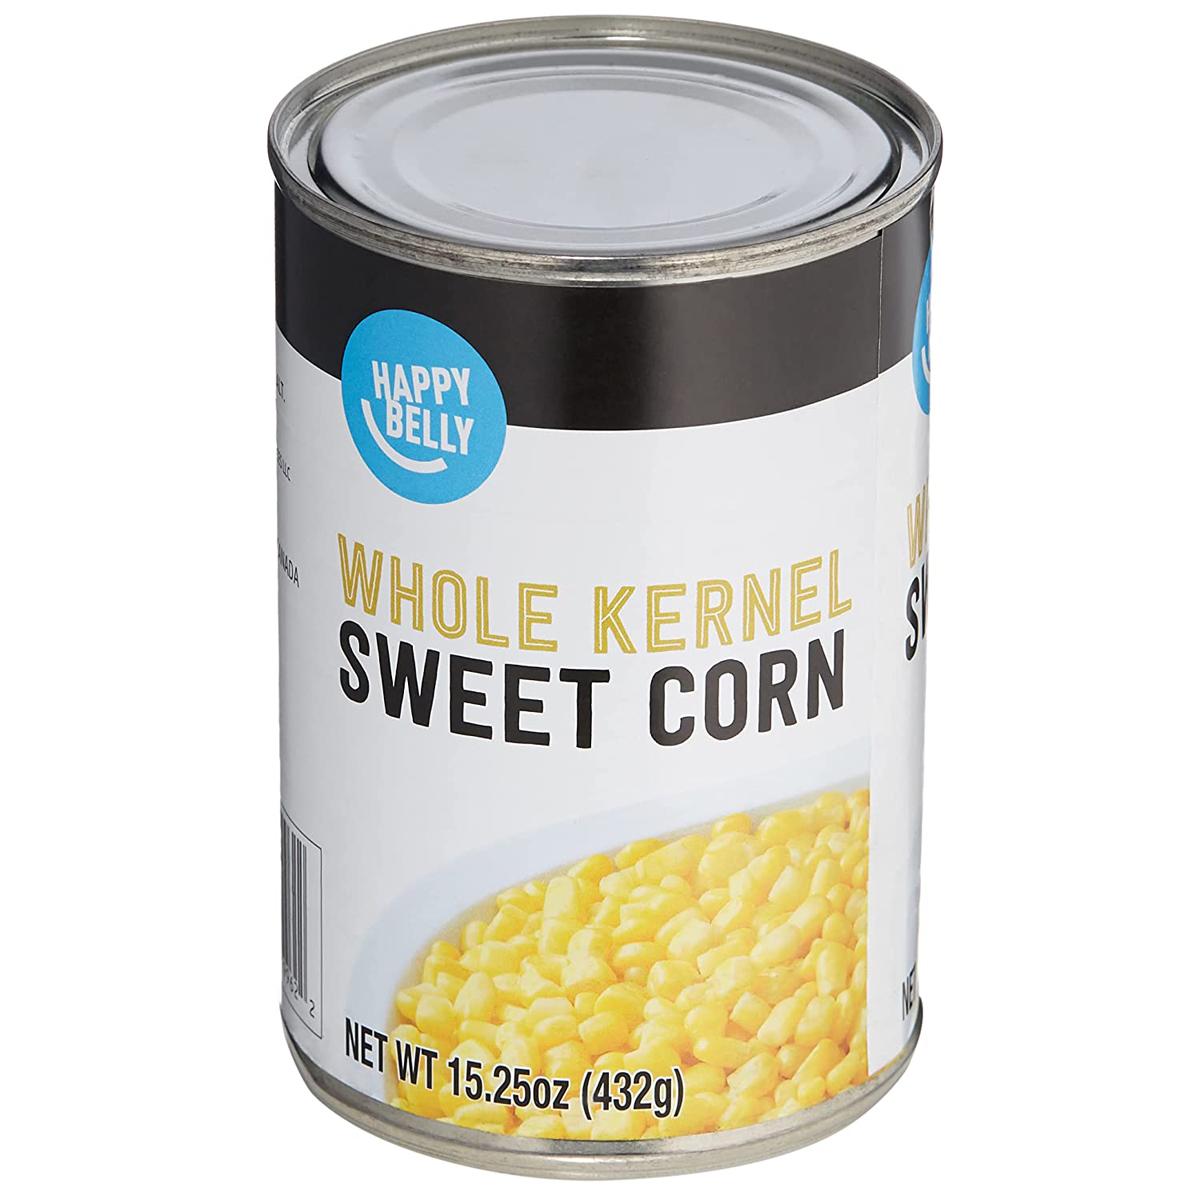 Happy Belly Whole Kernel Sweet Corn for $0.69